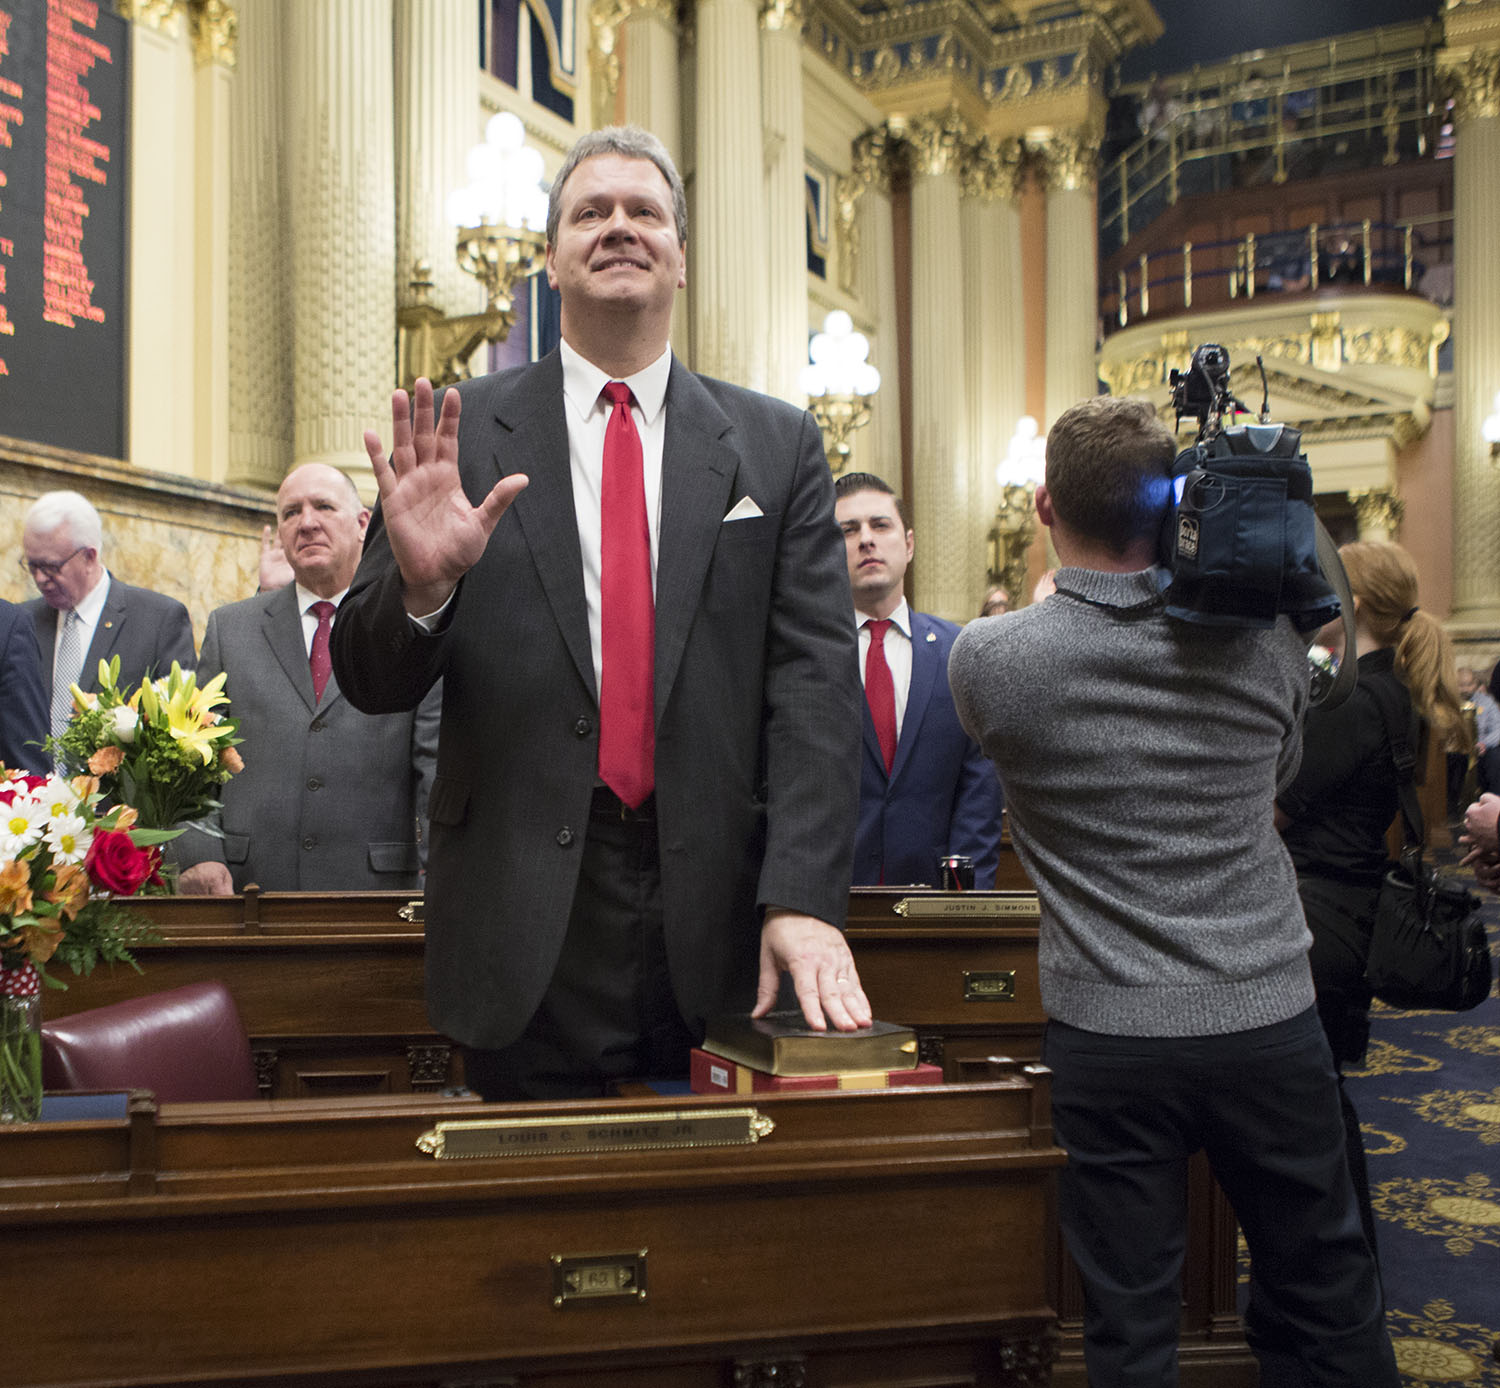 schmitt-takes-oath-of-office-during-capitol-ceremony-pa-state-rep